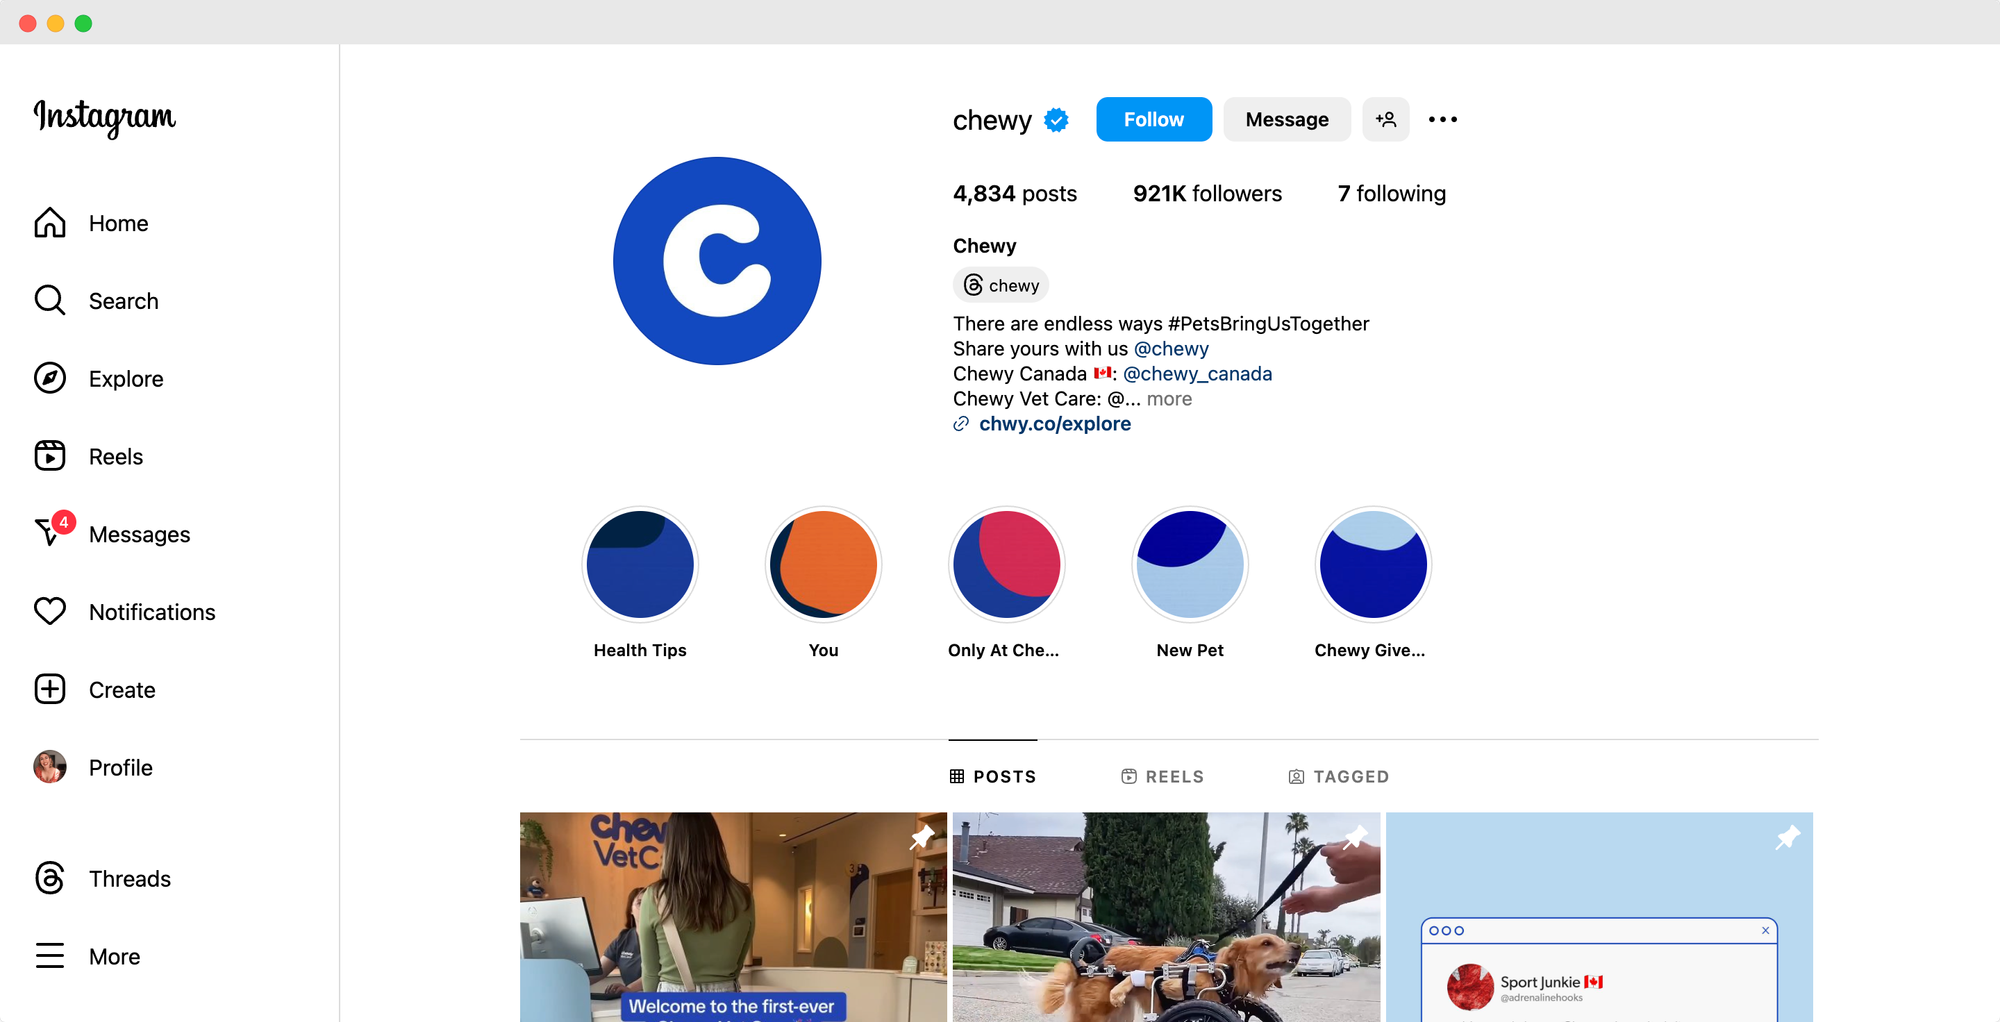 Chewy's Instagram profile